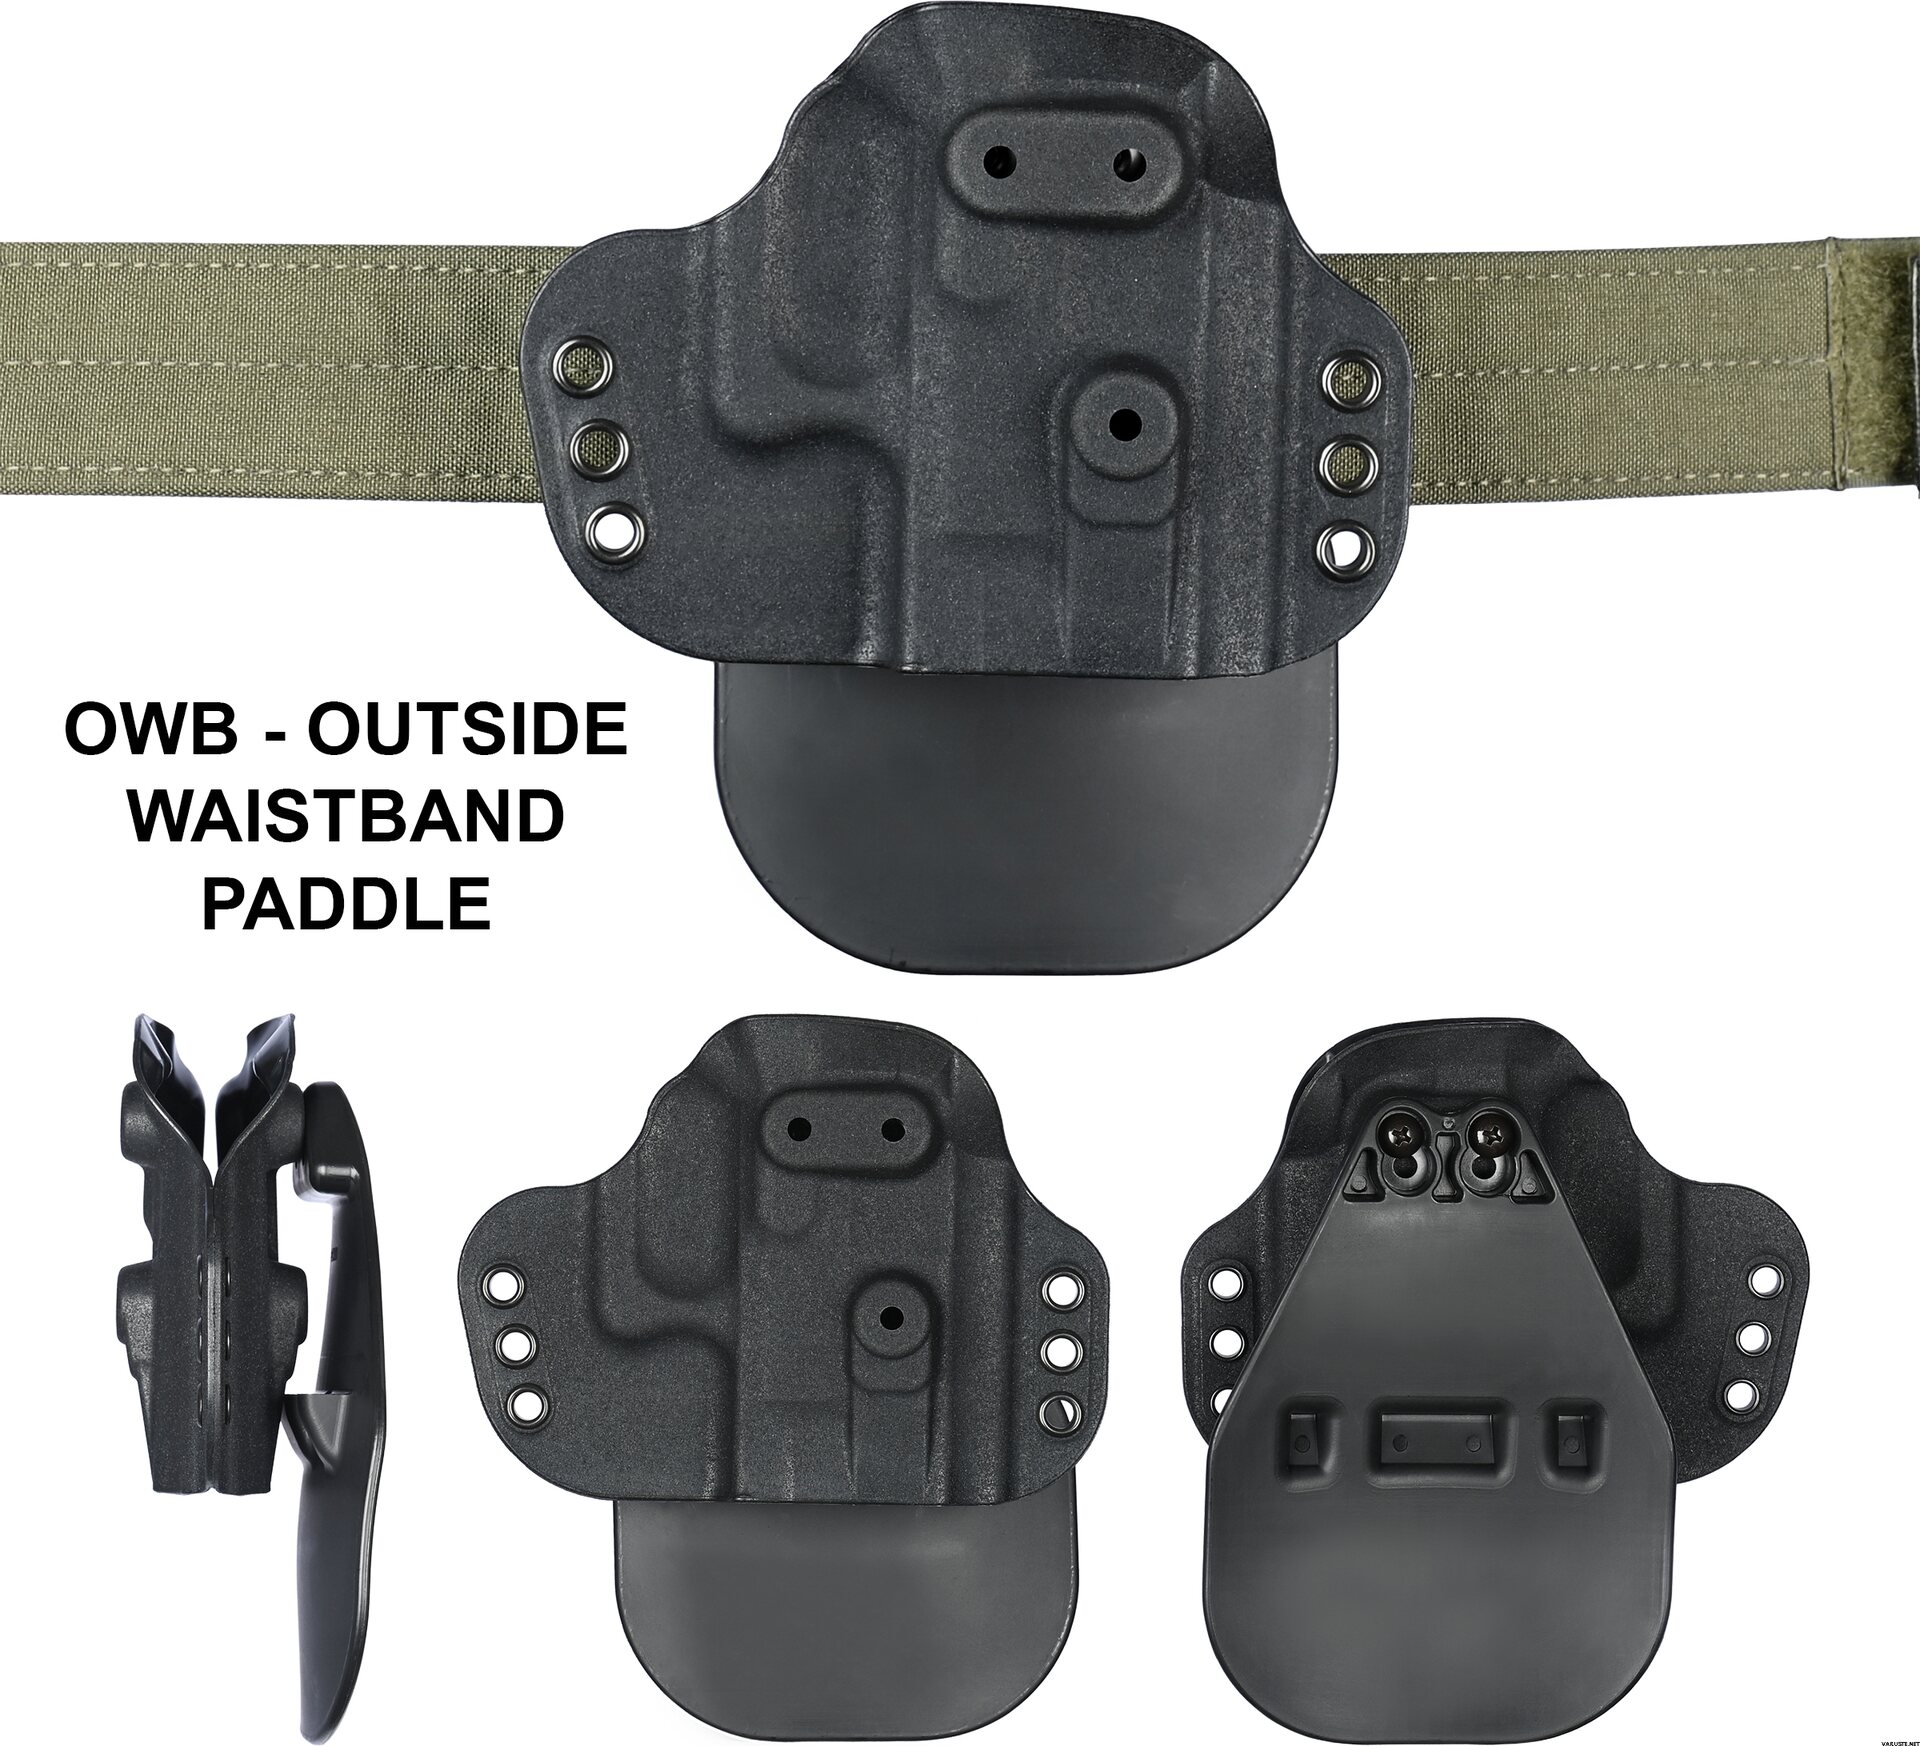 G-Code Paradigm Universal Fit Holster | Law Enforcement Pistol holsters ...